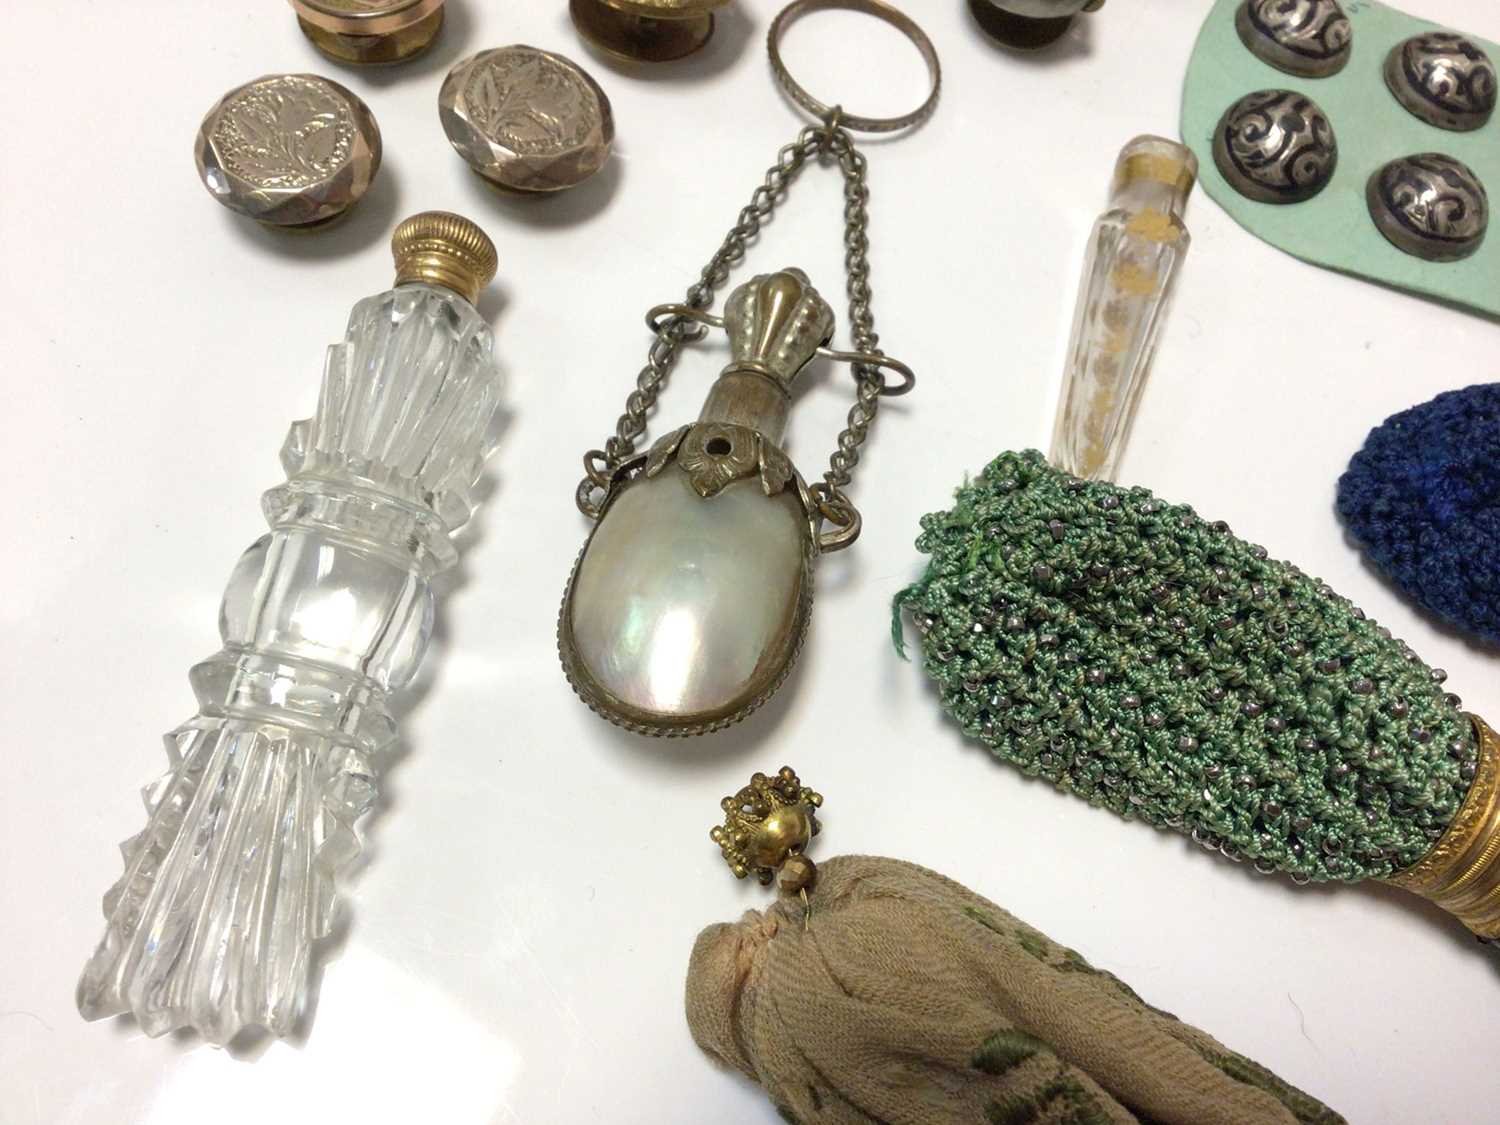 Vertical items and bijouterie including scent bottles, pen knives, buttons and miser's purses - Image 2 of 7